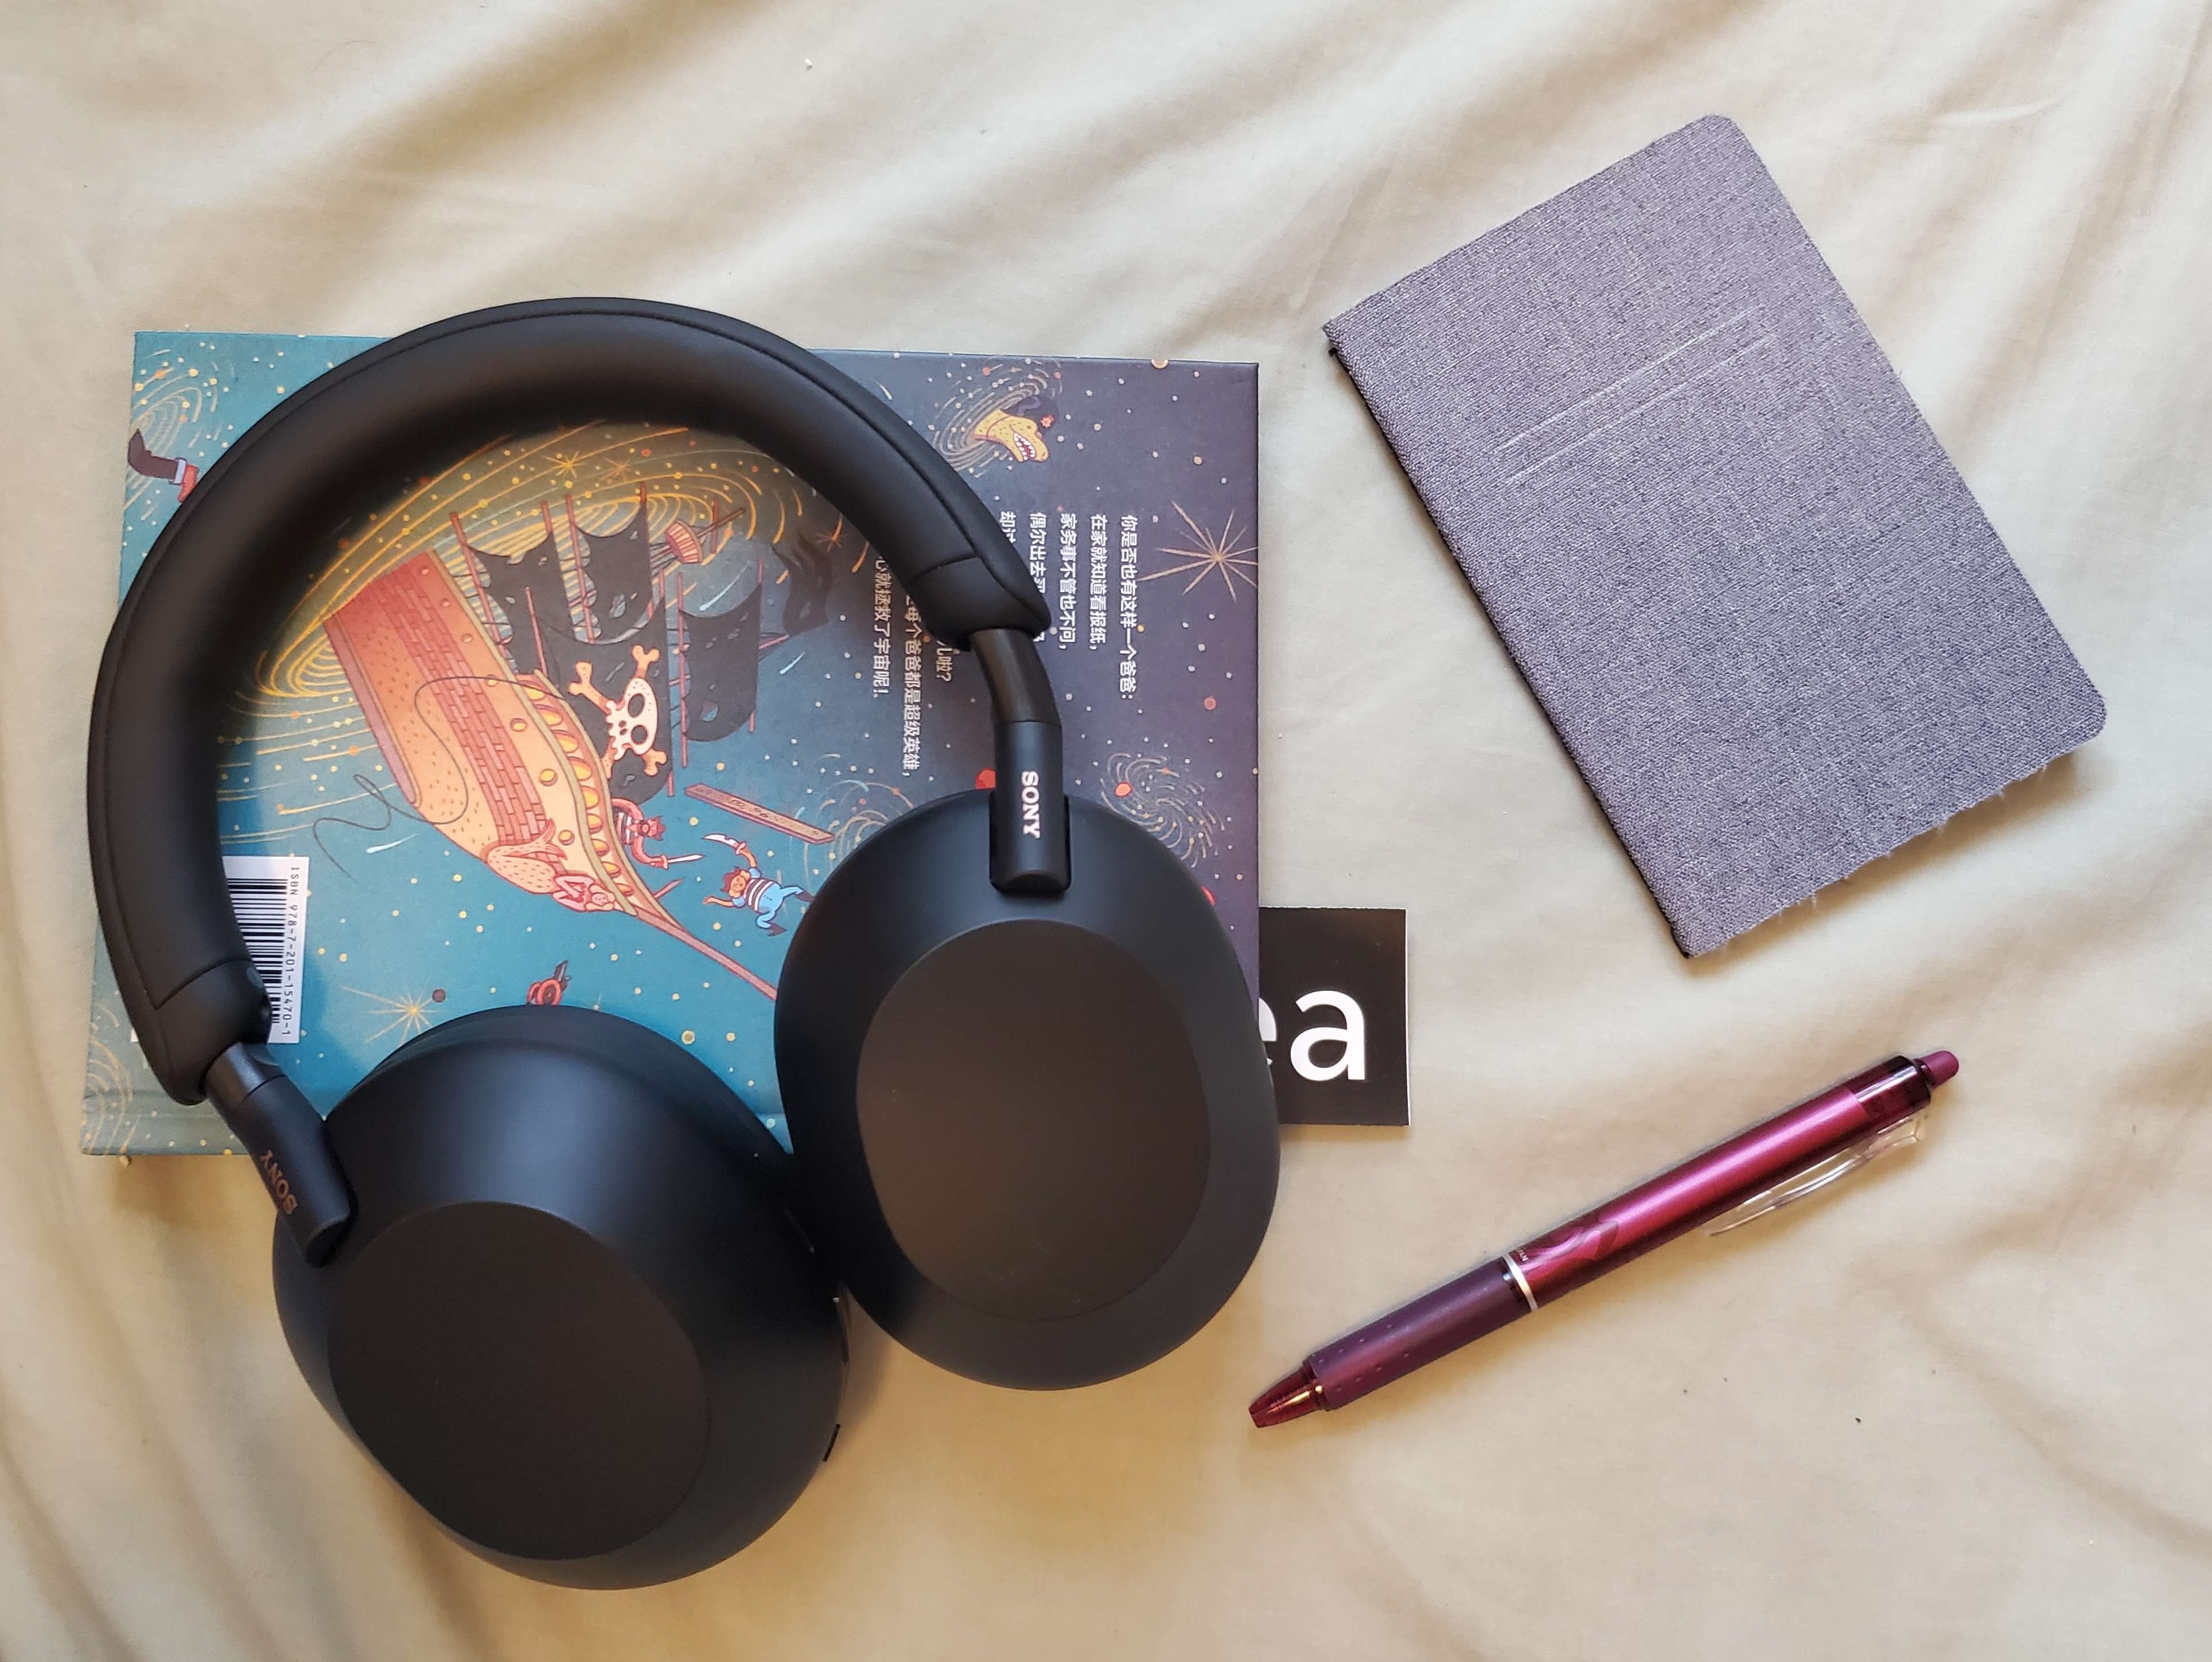 Cheaper Than Black Friday: The Sony WH-1000XM5 Noise Cancelling